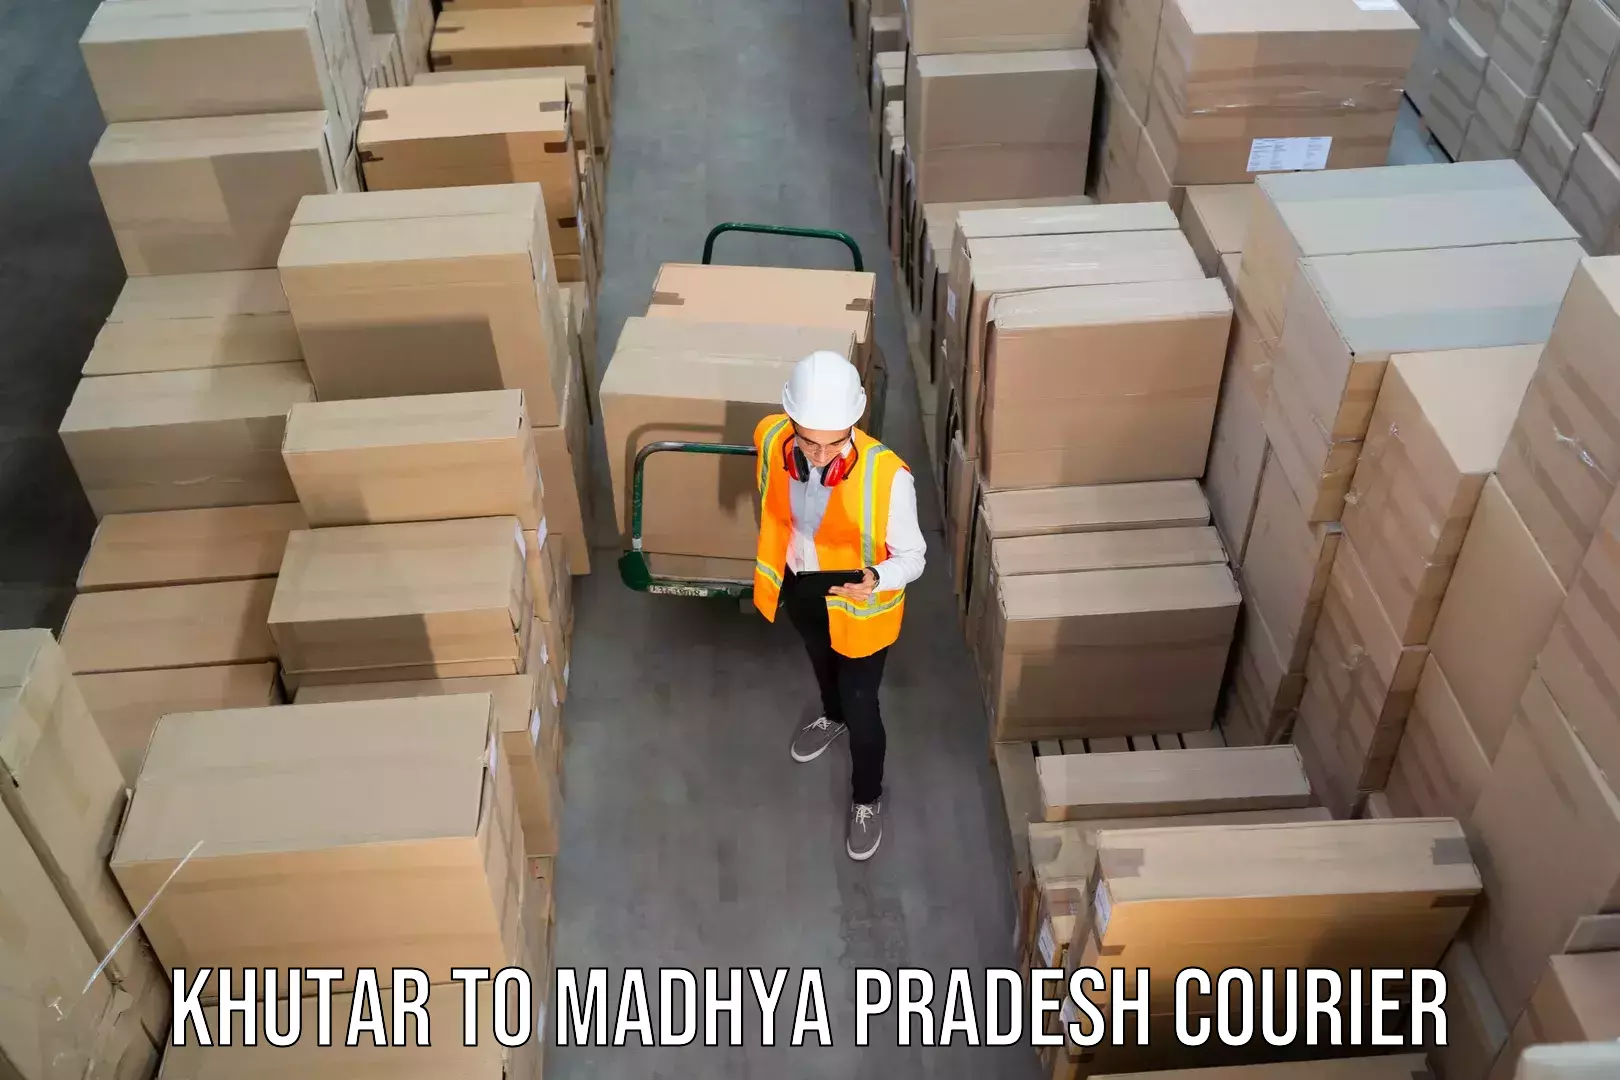 Pharmaceutical courier Khutar to BHEL Bhopal